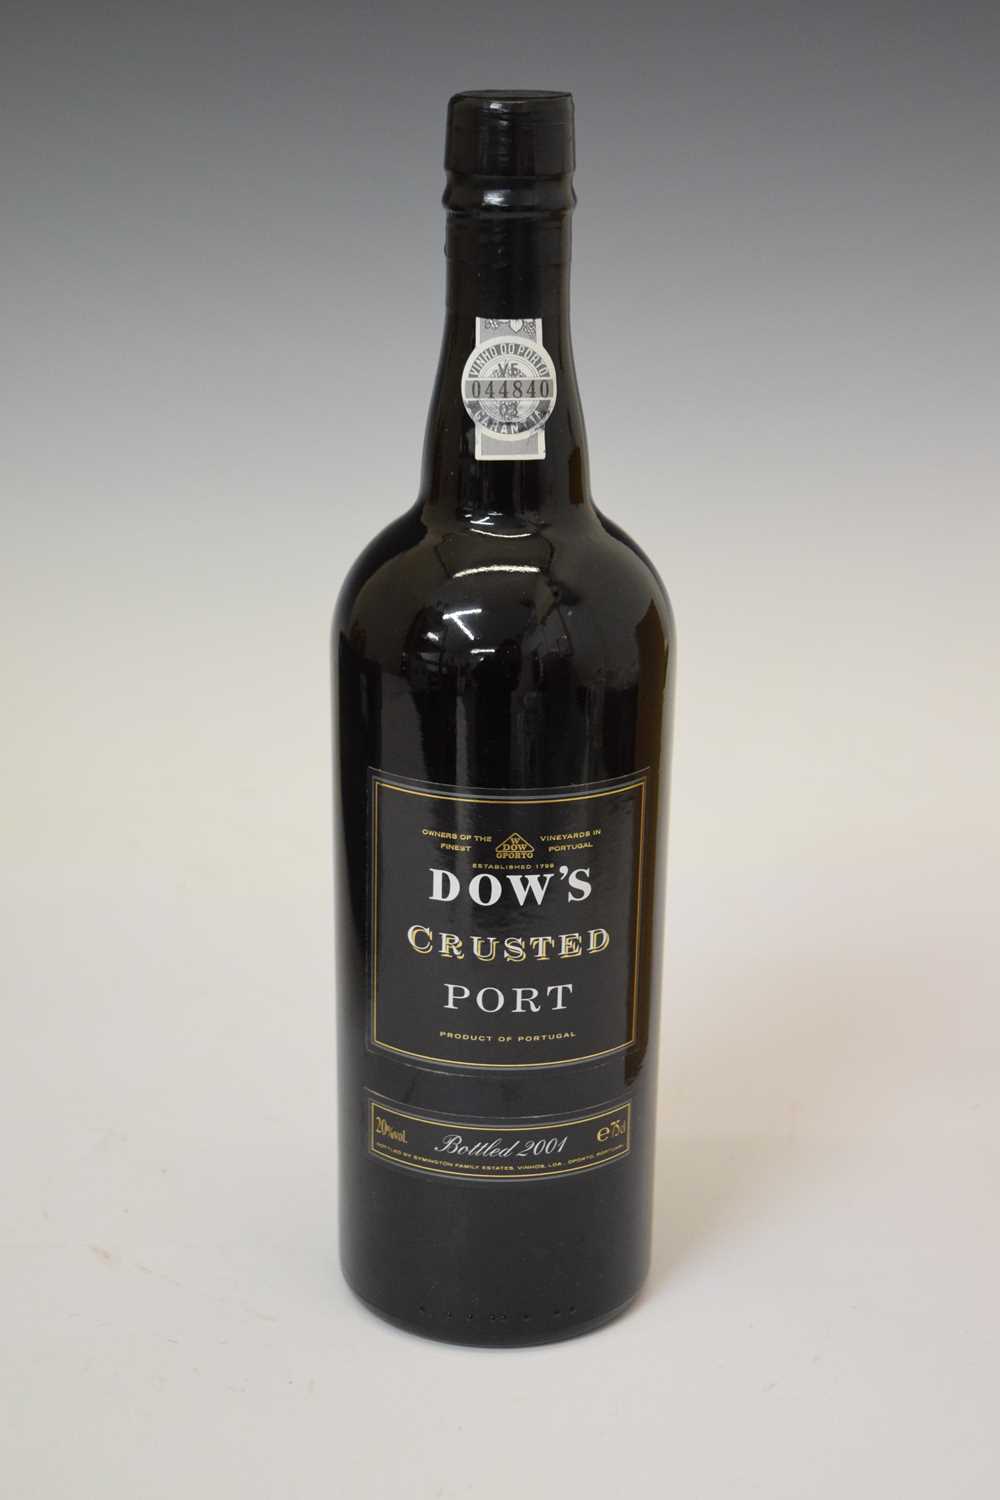 Dow’s crusted port, bottled 2001, 1 bottle, in presentation box - Image 3 of 6